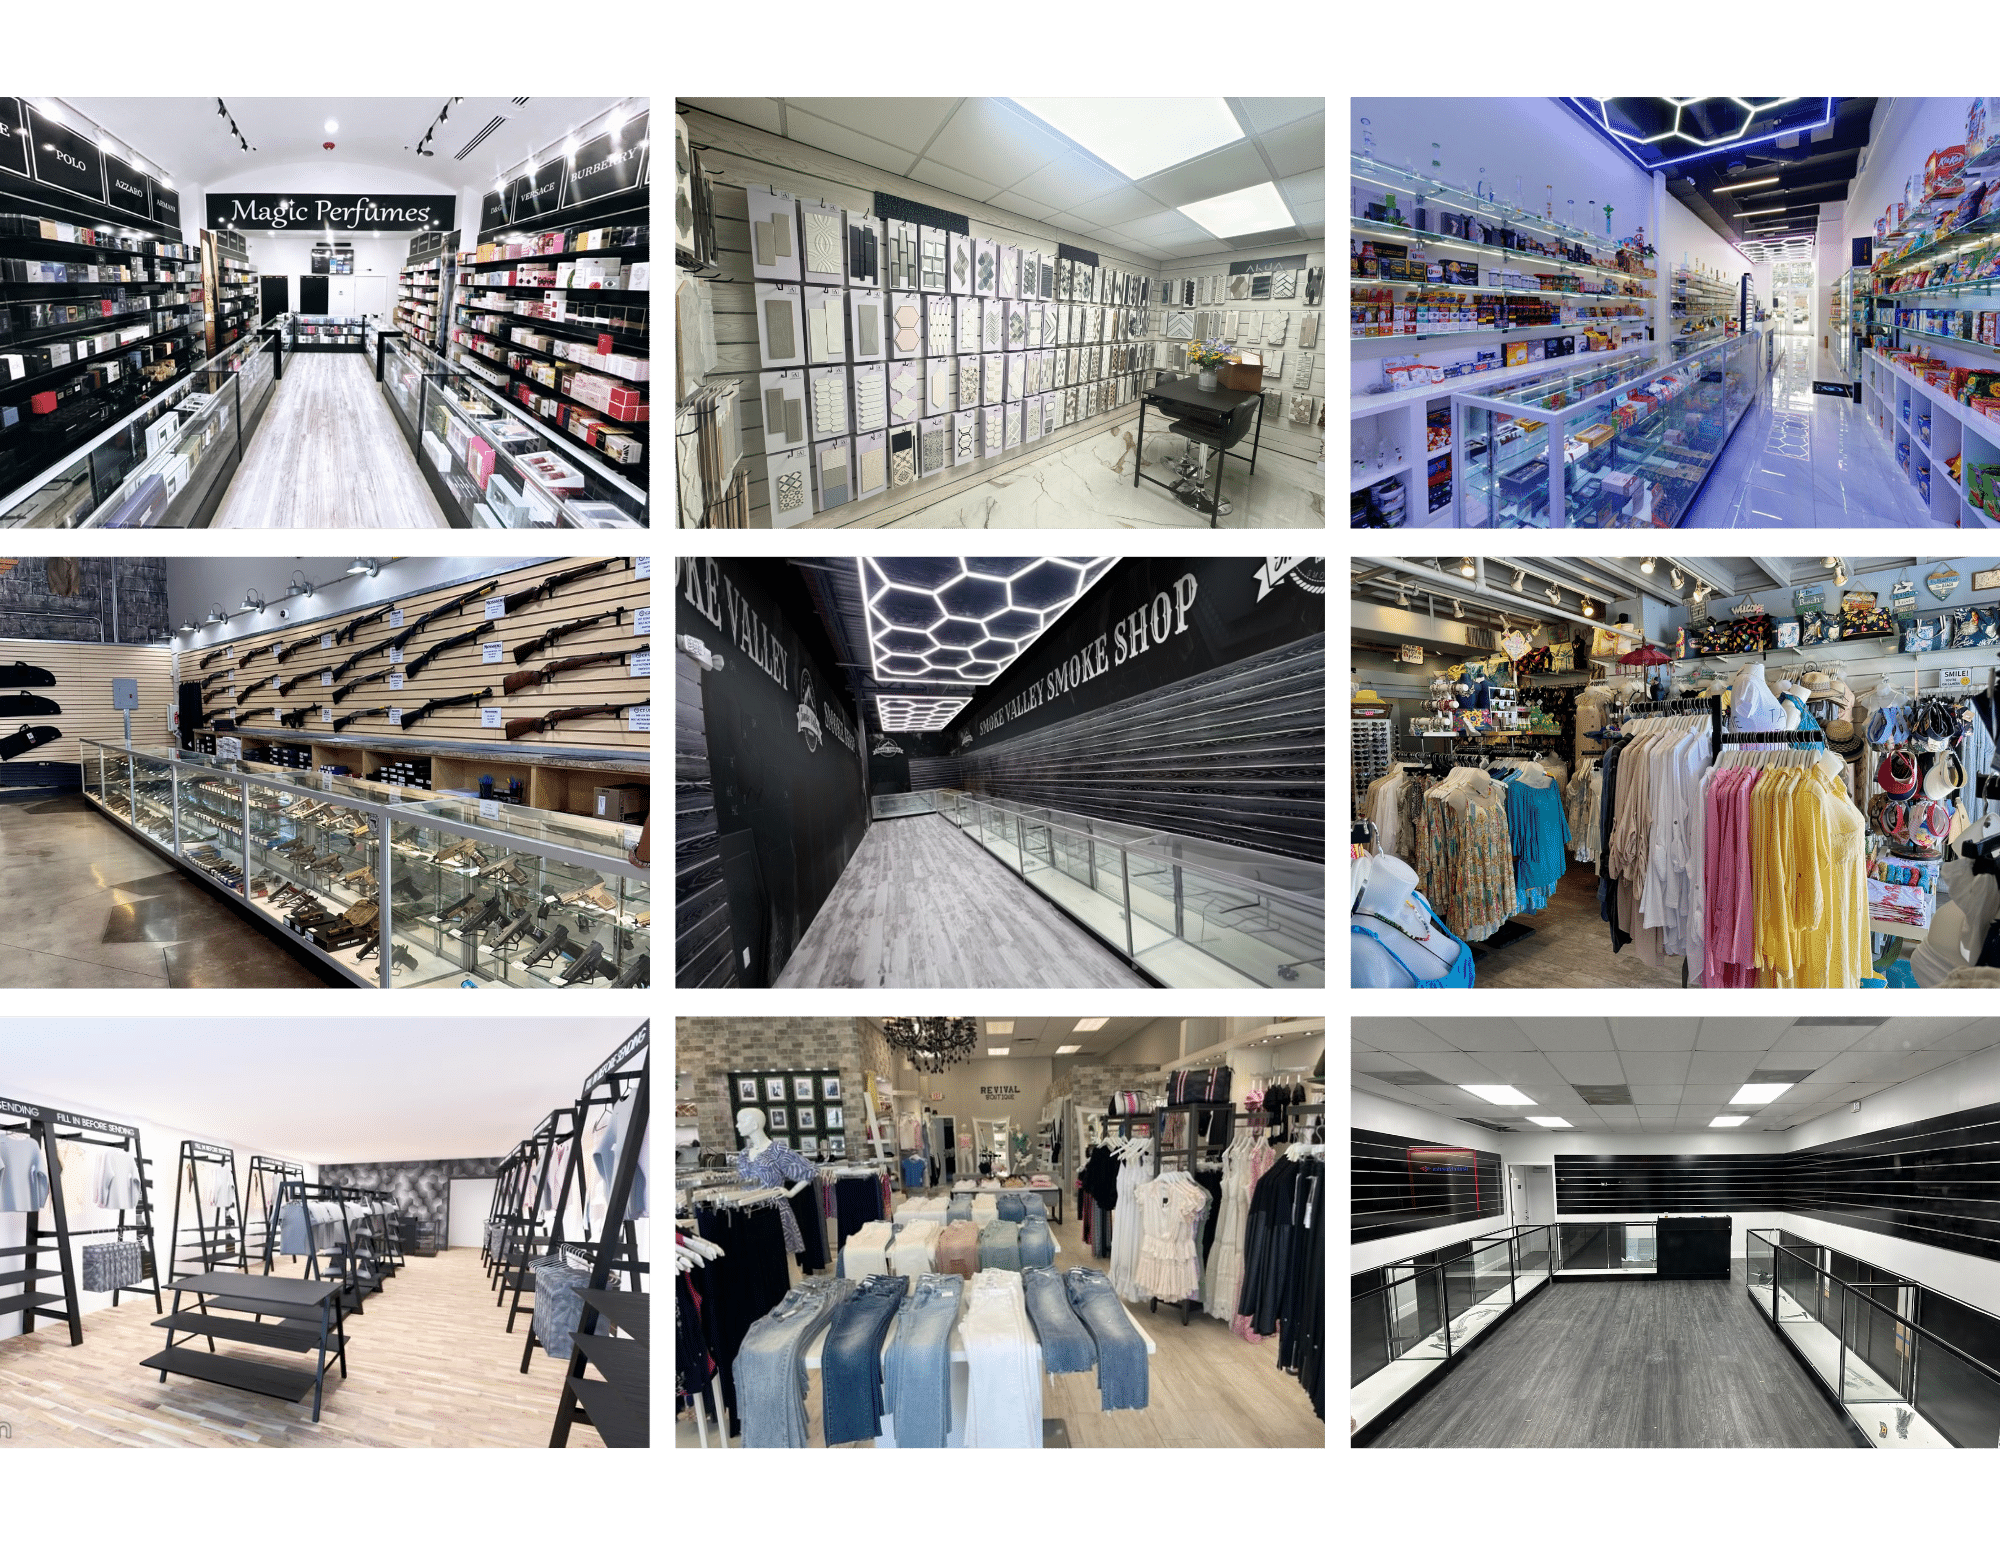 Images of retail stores in grid pattern.